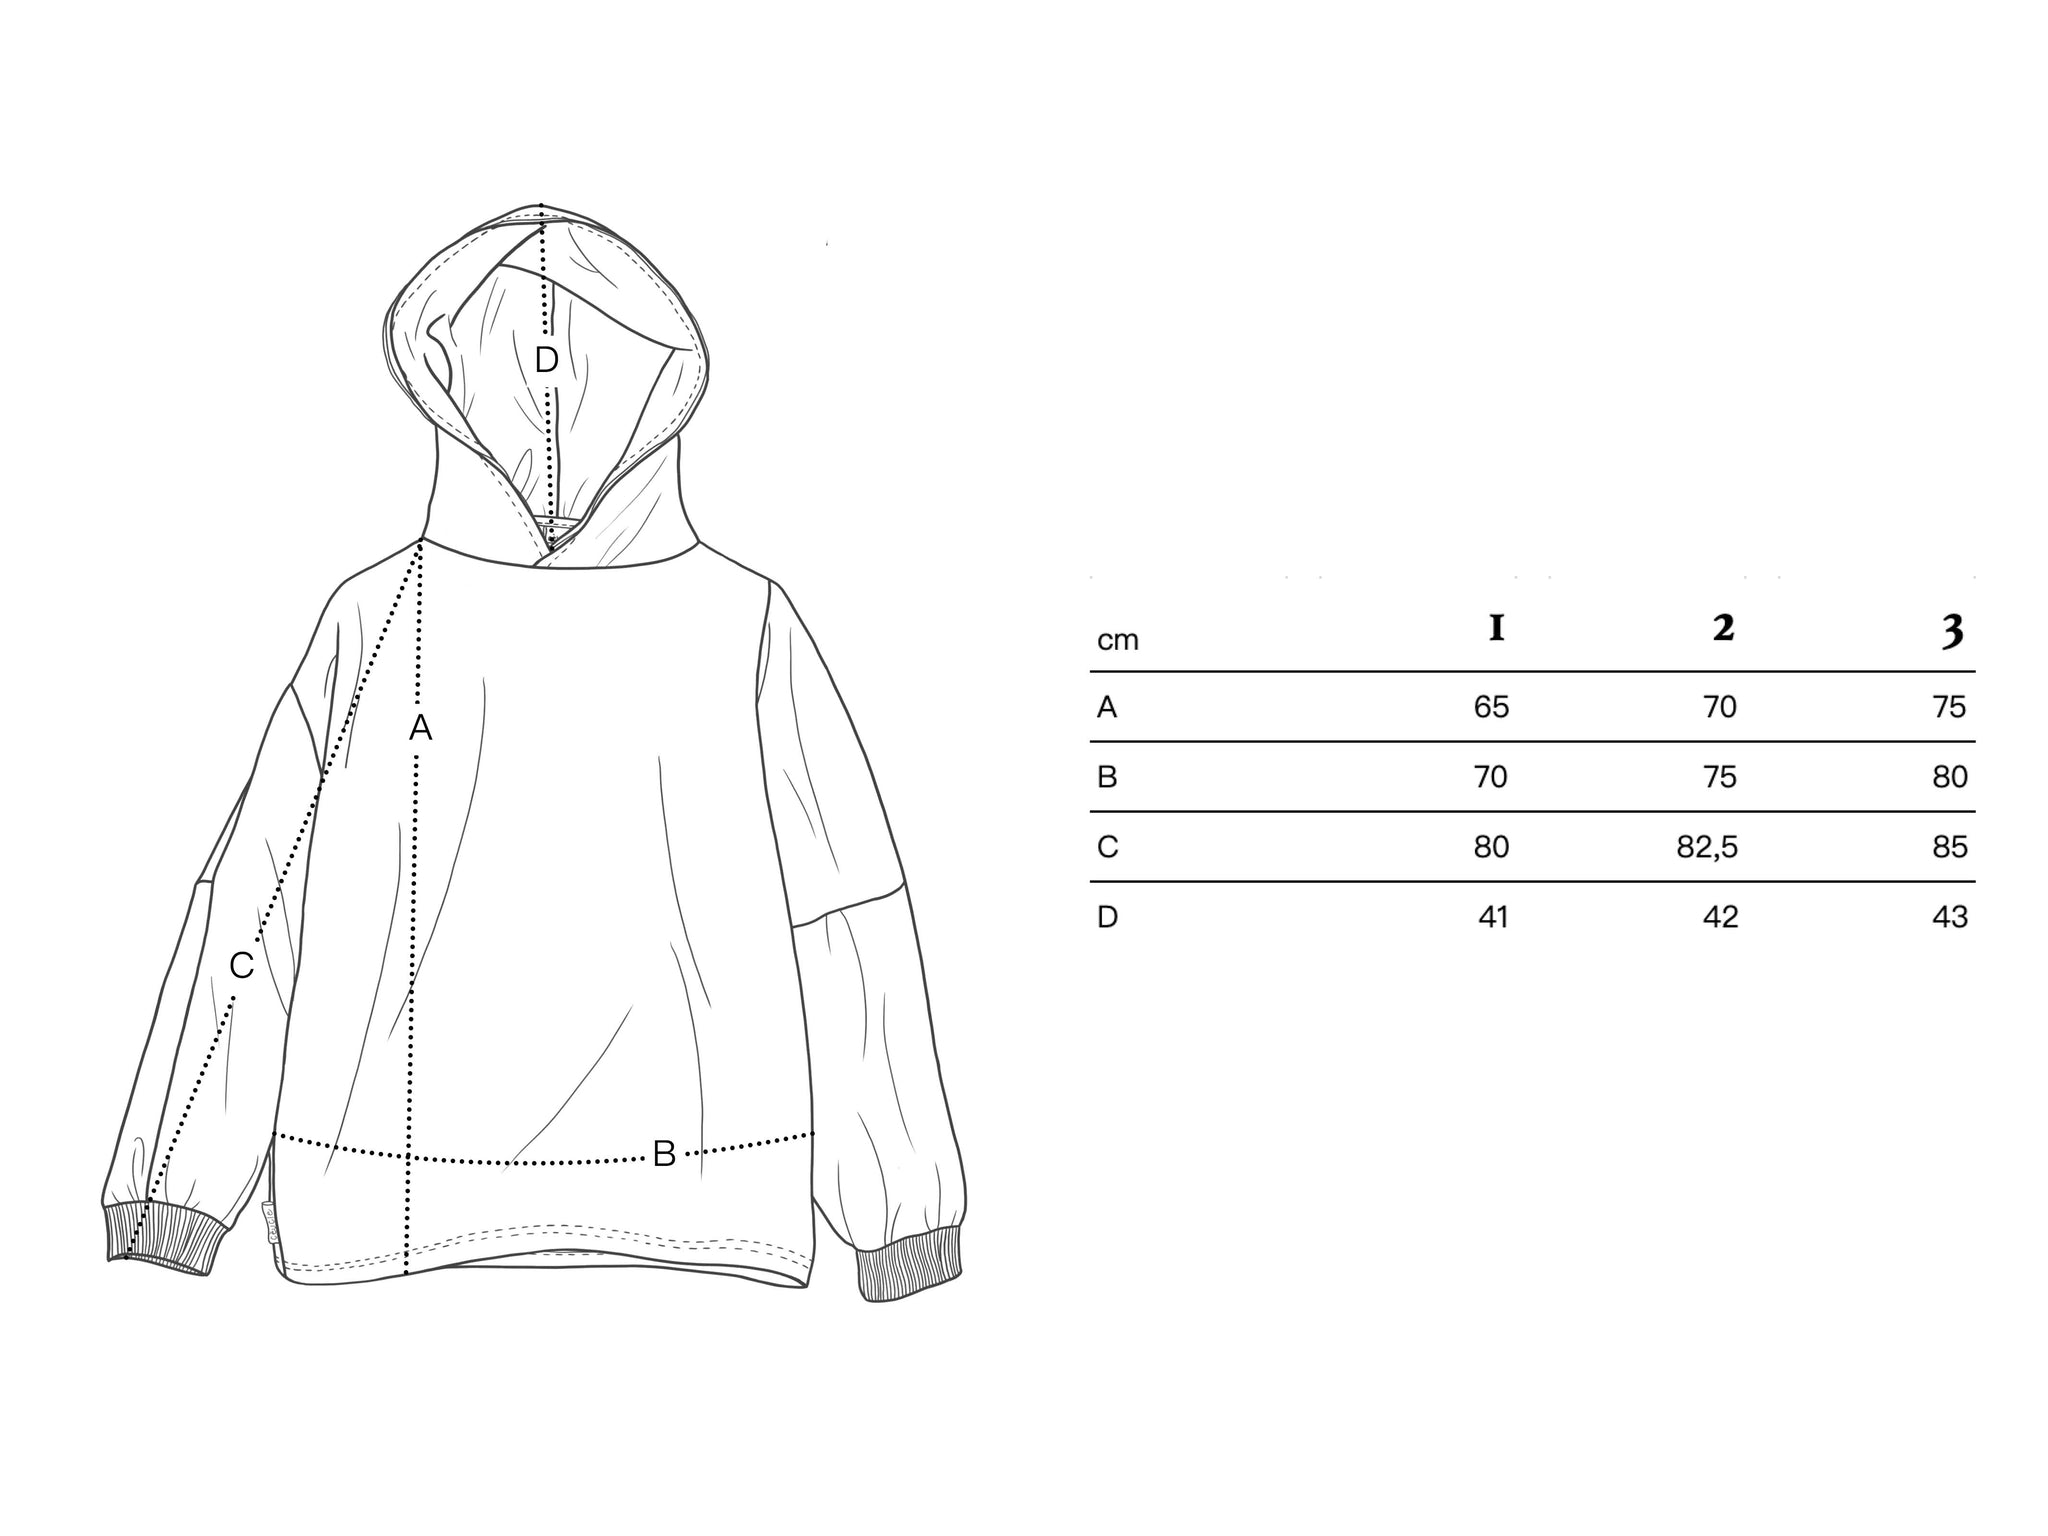 Adulte - Hoodie Chapitre 1 - Size guide